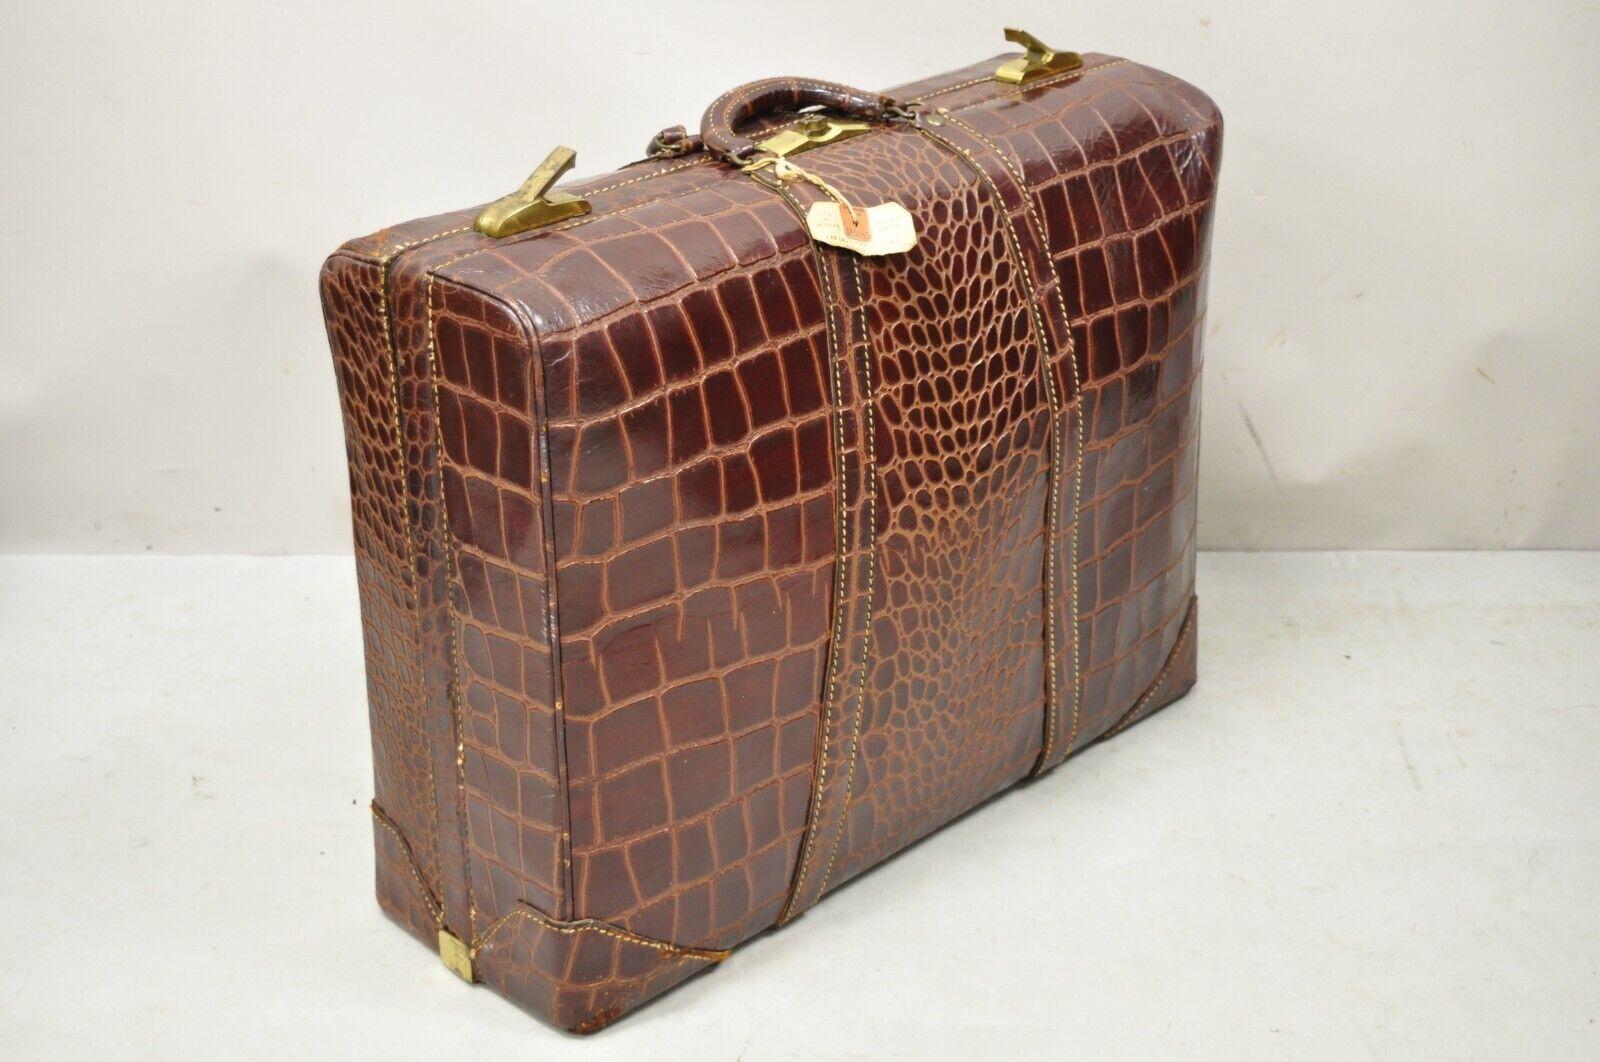 Vintage Burgundy leather Alligator Embossed large Suitcase Luggage bag. Item features multiple interior compartments, alligator embossed burgundy leather, no key, but unlocked. Circa Early 1900s. Measurements: 9